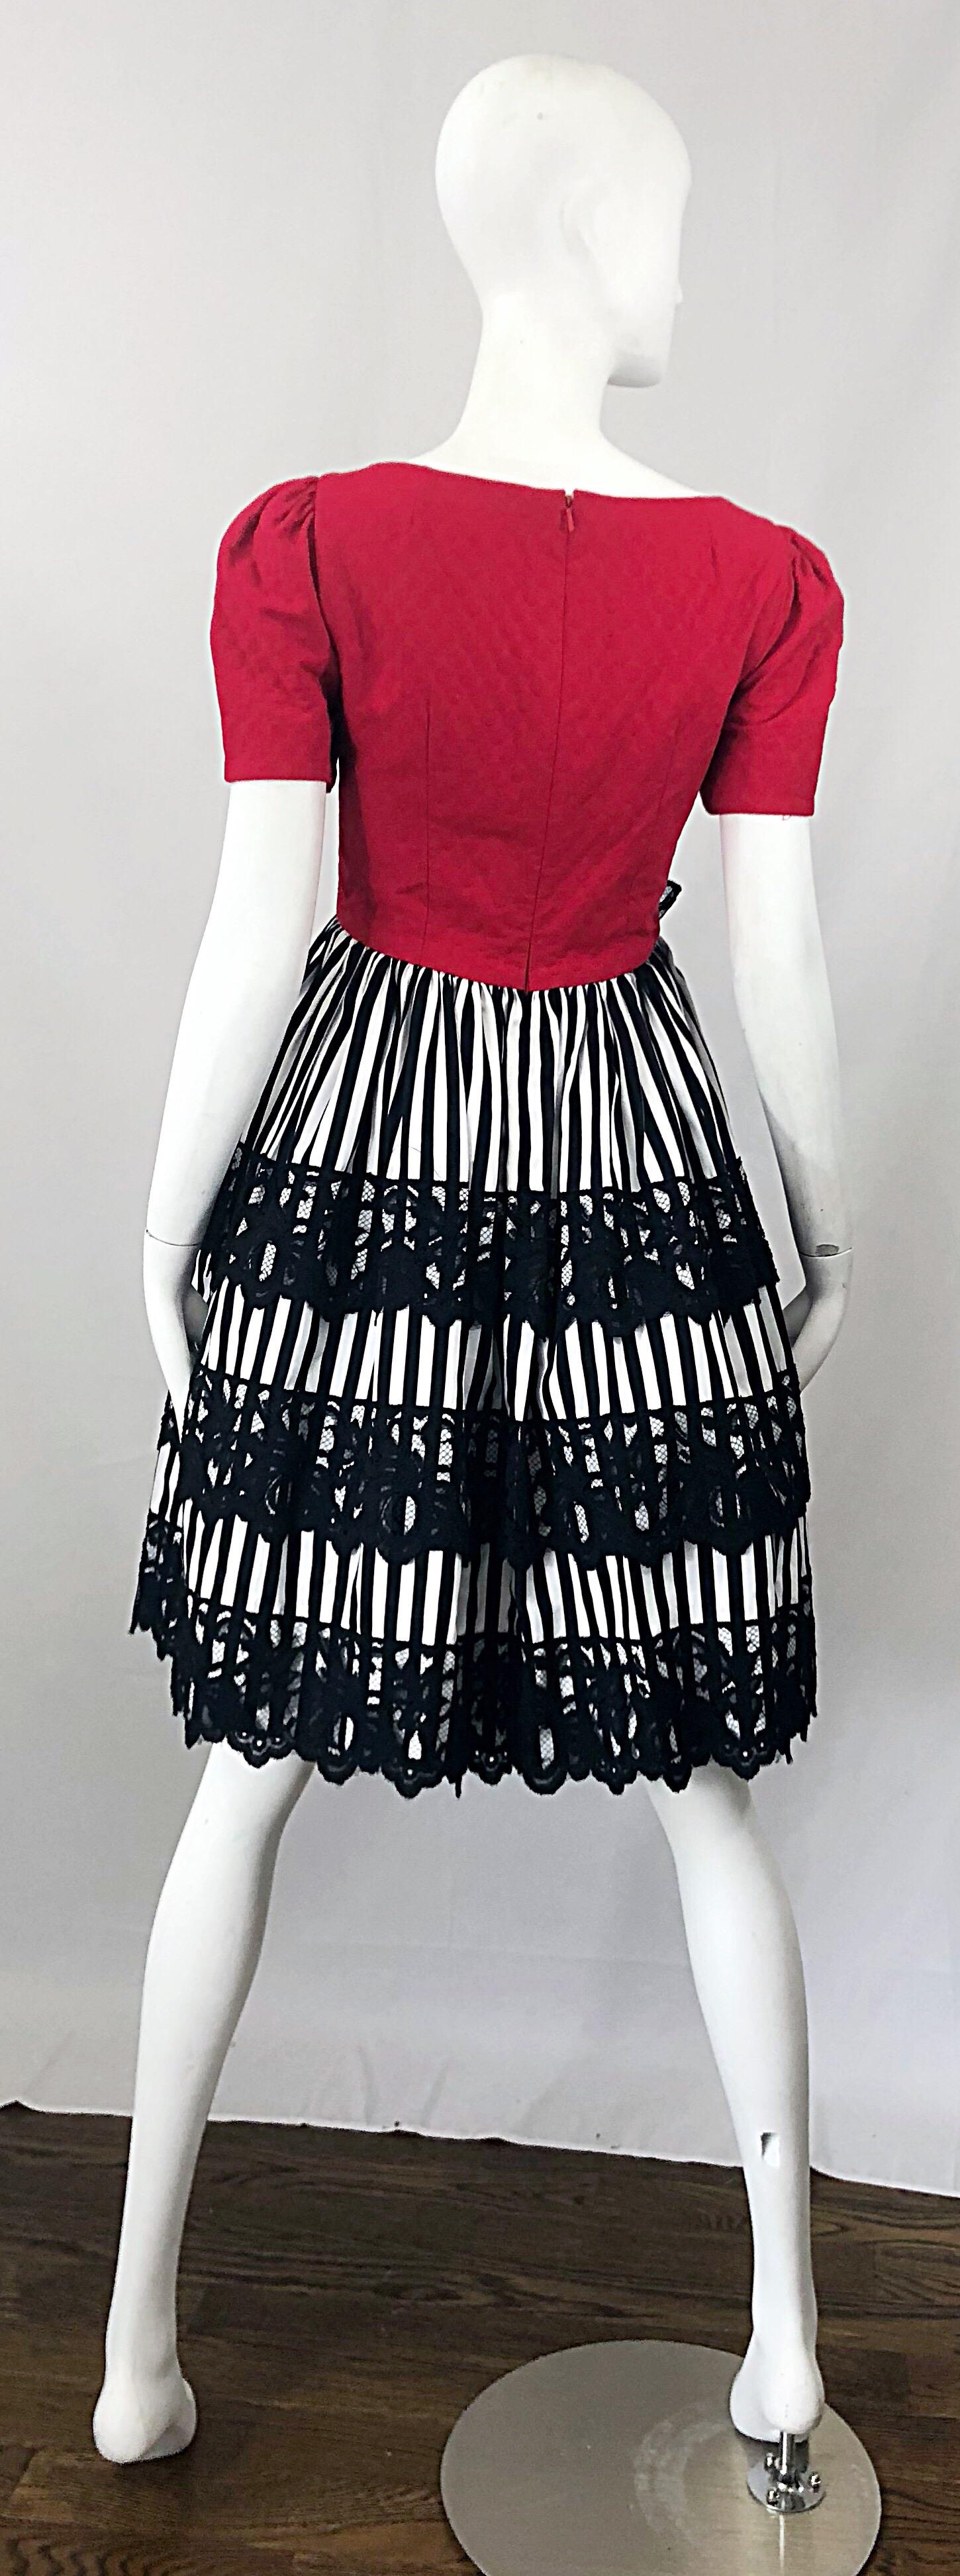 Vintage Adele Simpson 1980s Red Black White Fit n' Flare Empire Bow Lace Dress In Excellent Condition For Sale In San Diego, CA